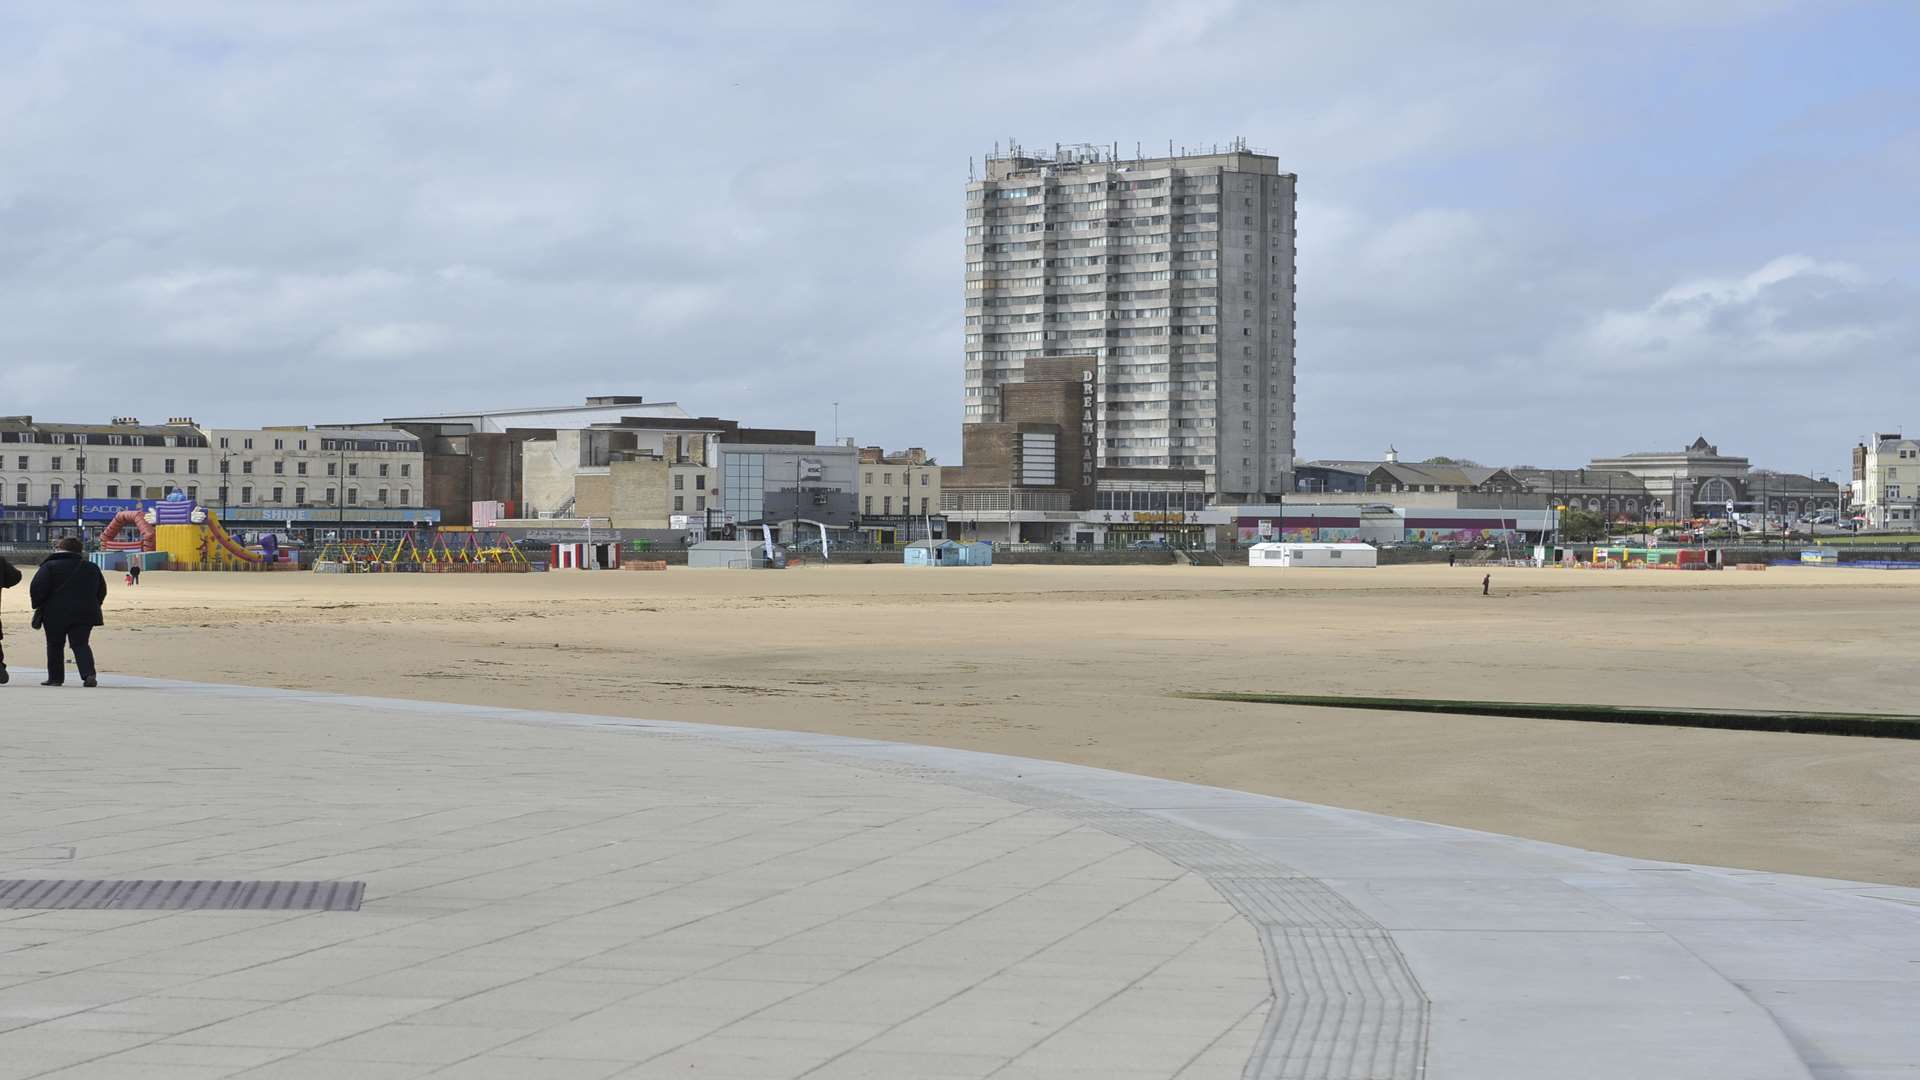 Margate's housing market has been called the hottest outside London